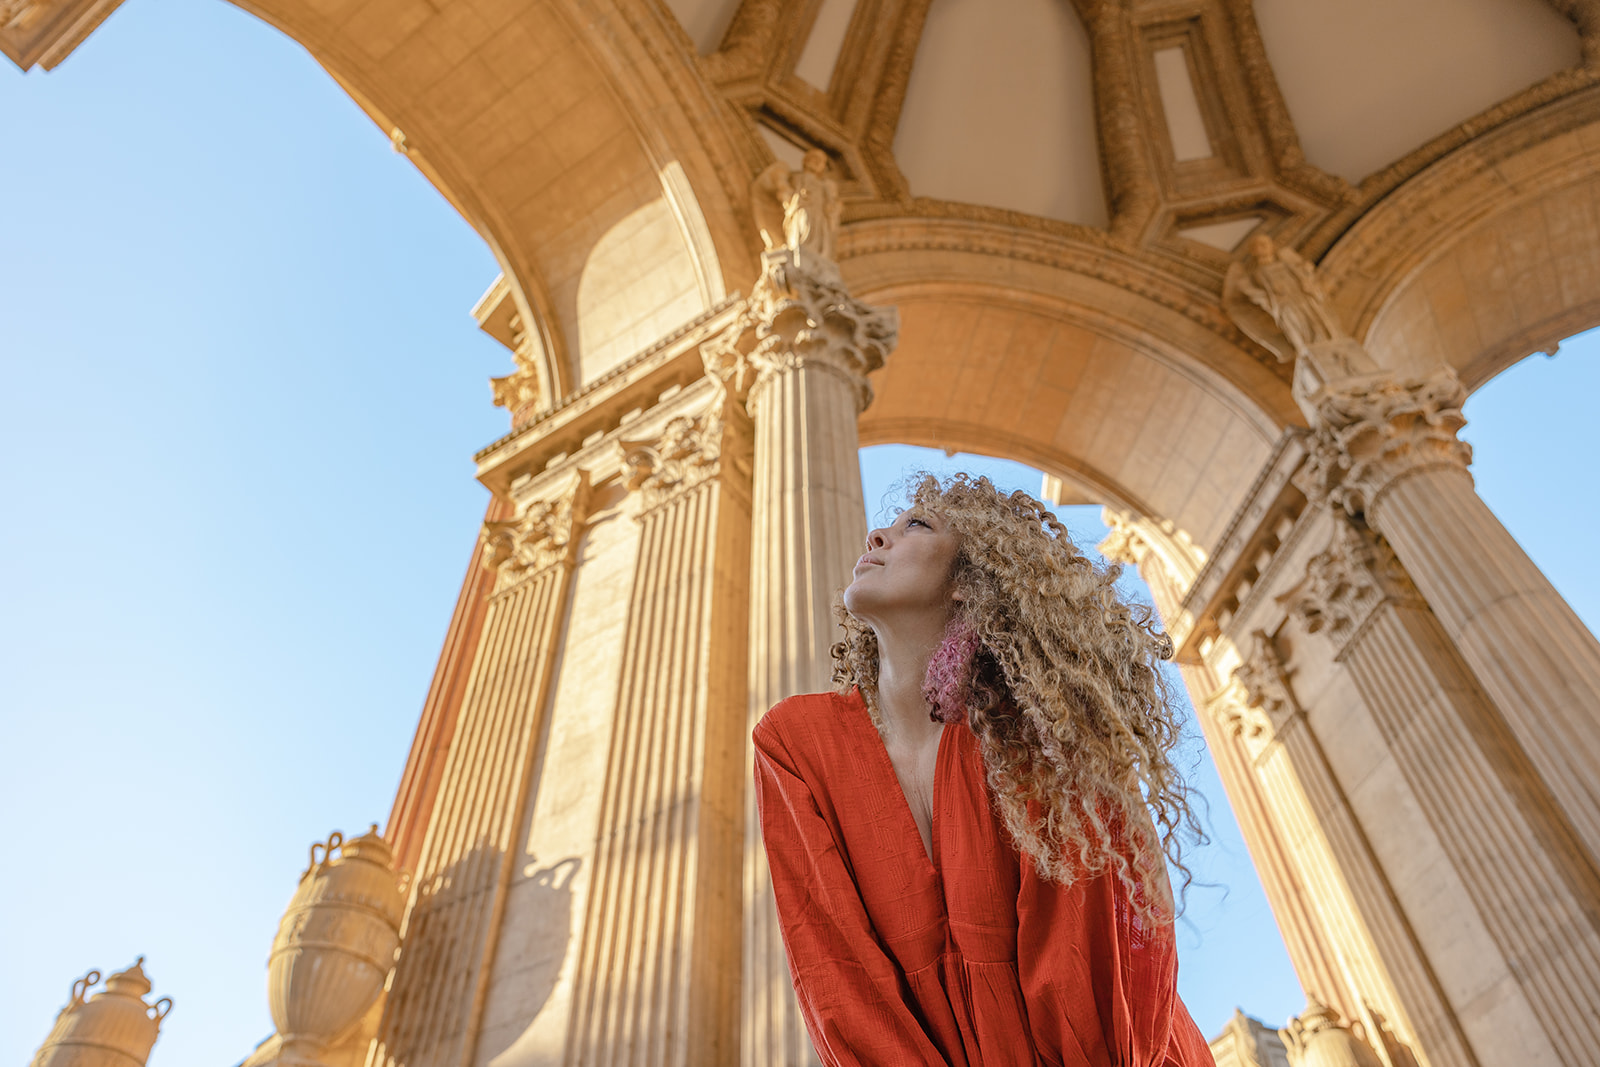 Woman standing inside the Greco-Roman style Rotunda and colonnades at Palace of Fine Arts